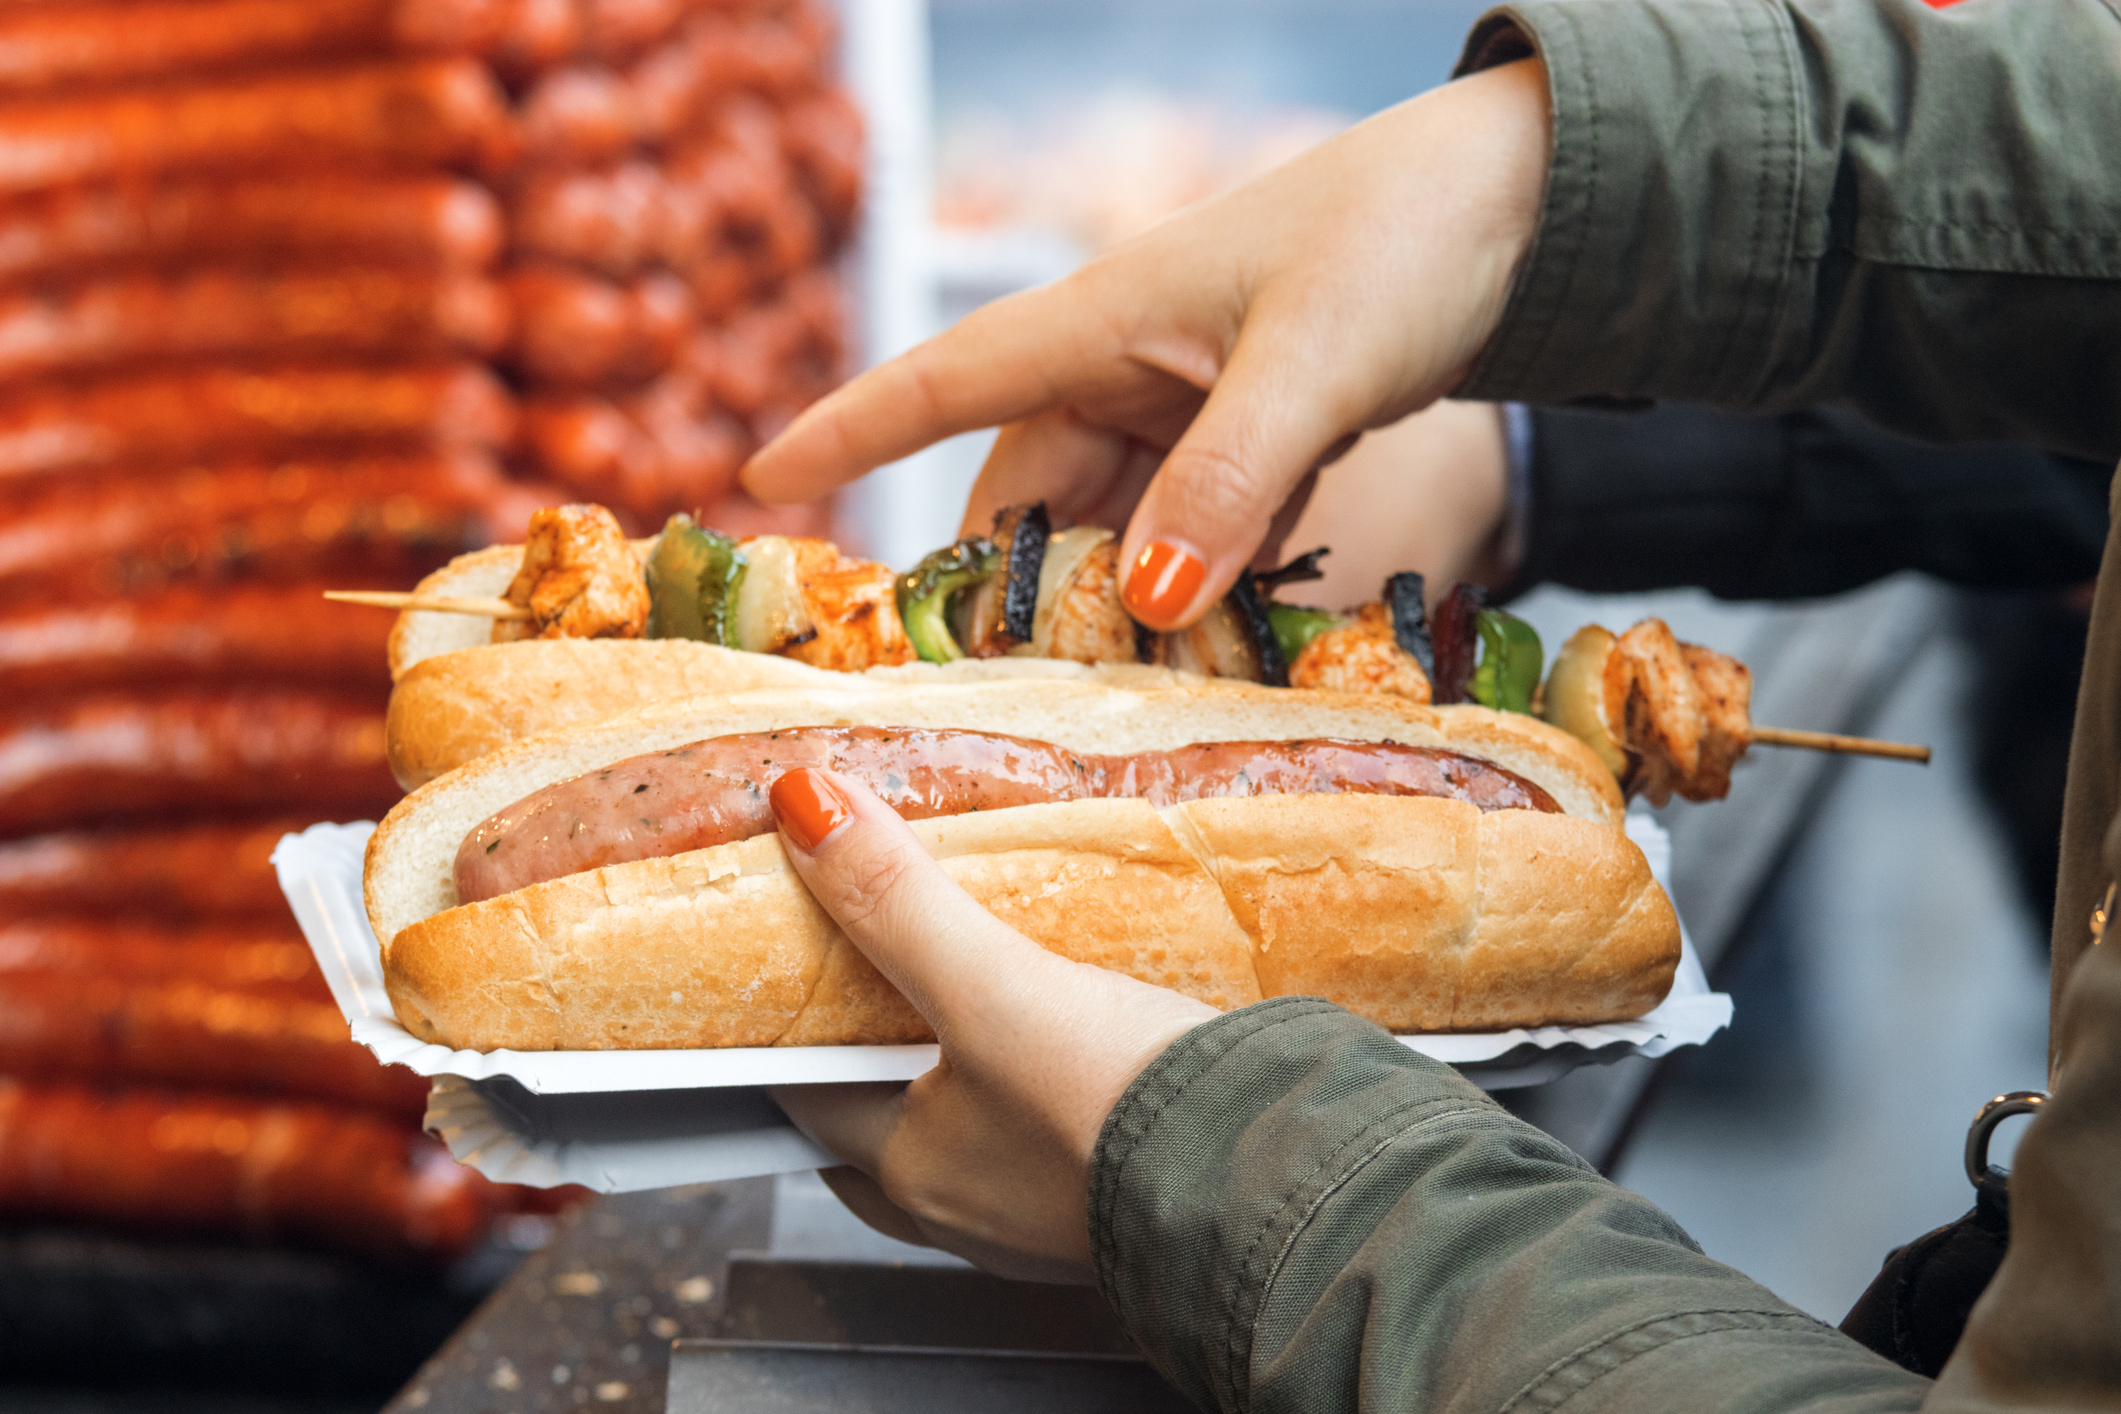 Woman bought her meal at Christmas street market. She holds paper tray in left hand, 2 breads on the tray, one with the sausage and  the other one with kebab skewer. Detail image, focus on 1st bread with sausage.